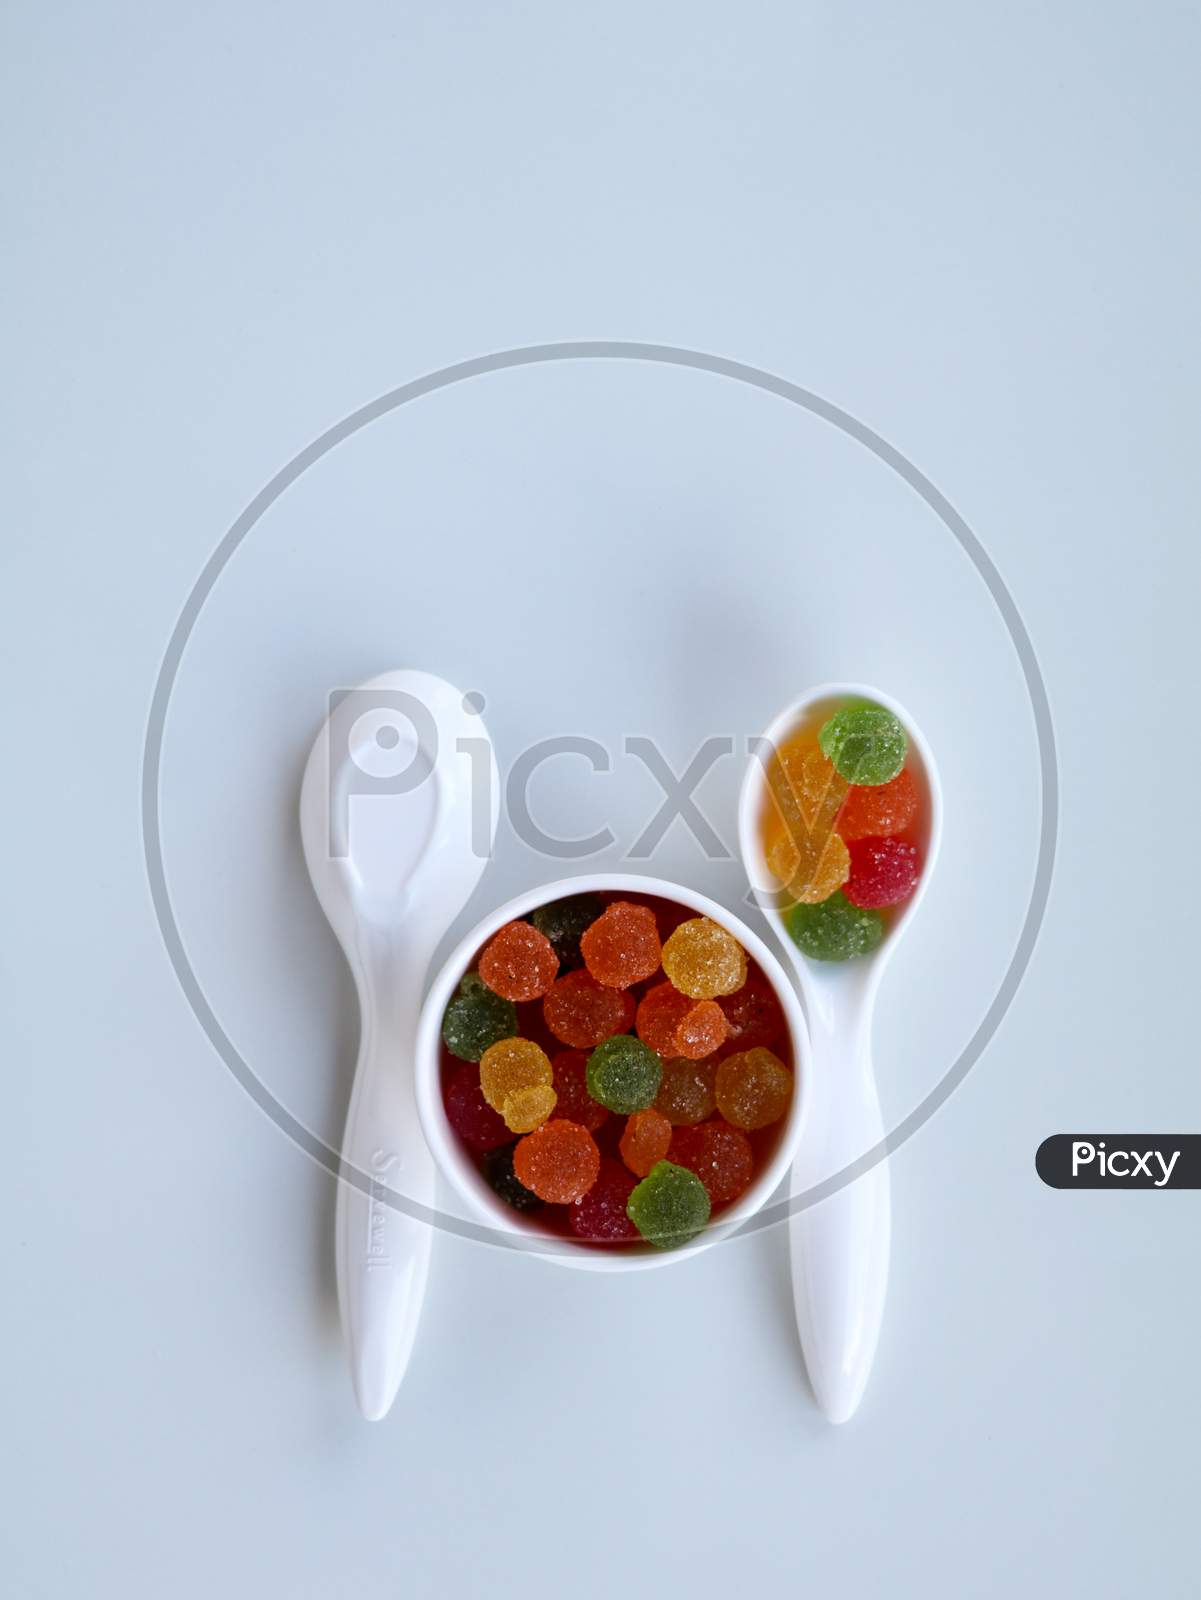 Sweet Mixed Color Jelly Candy In A White Spoon Against White Background With Copy Space